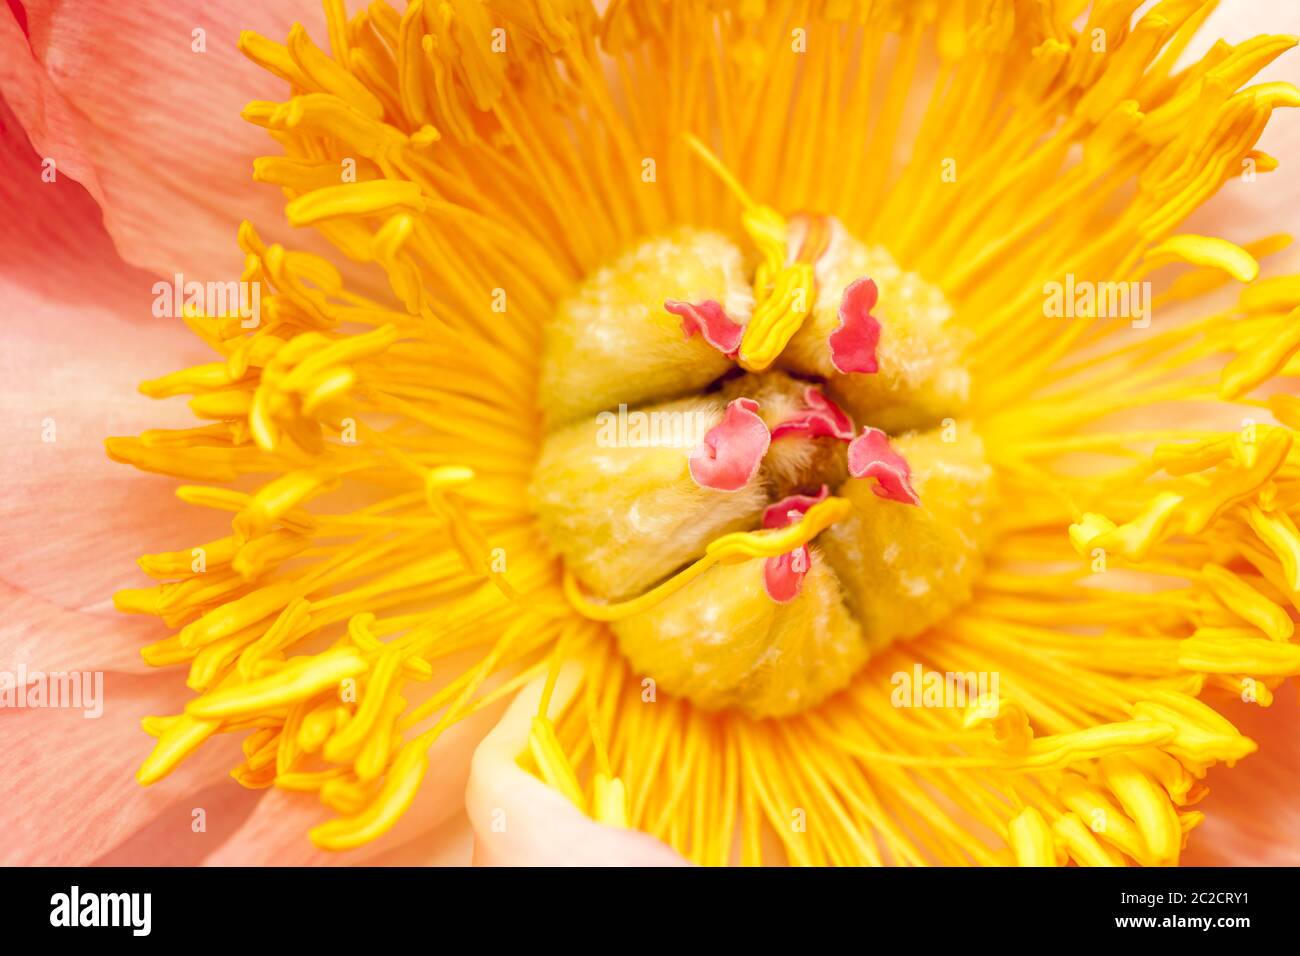 Interior of a peony detail Stock Photo